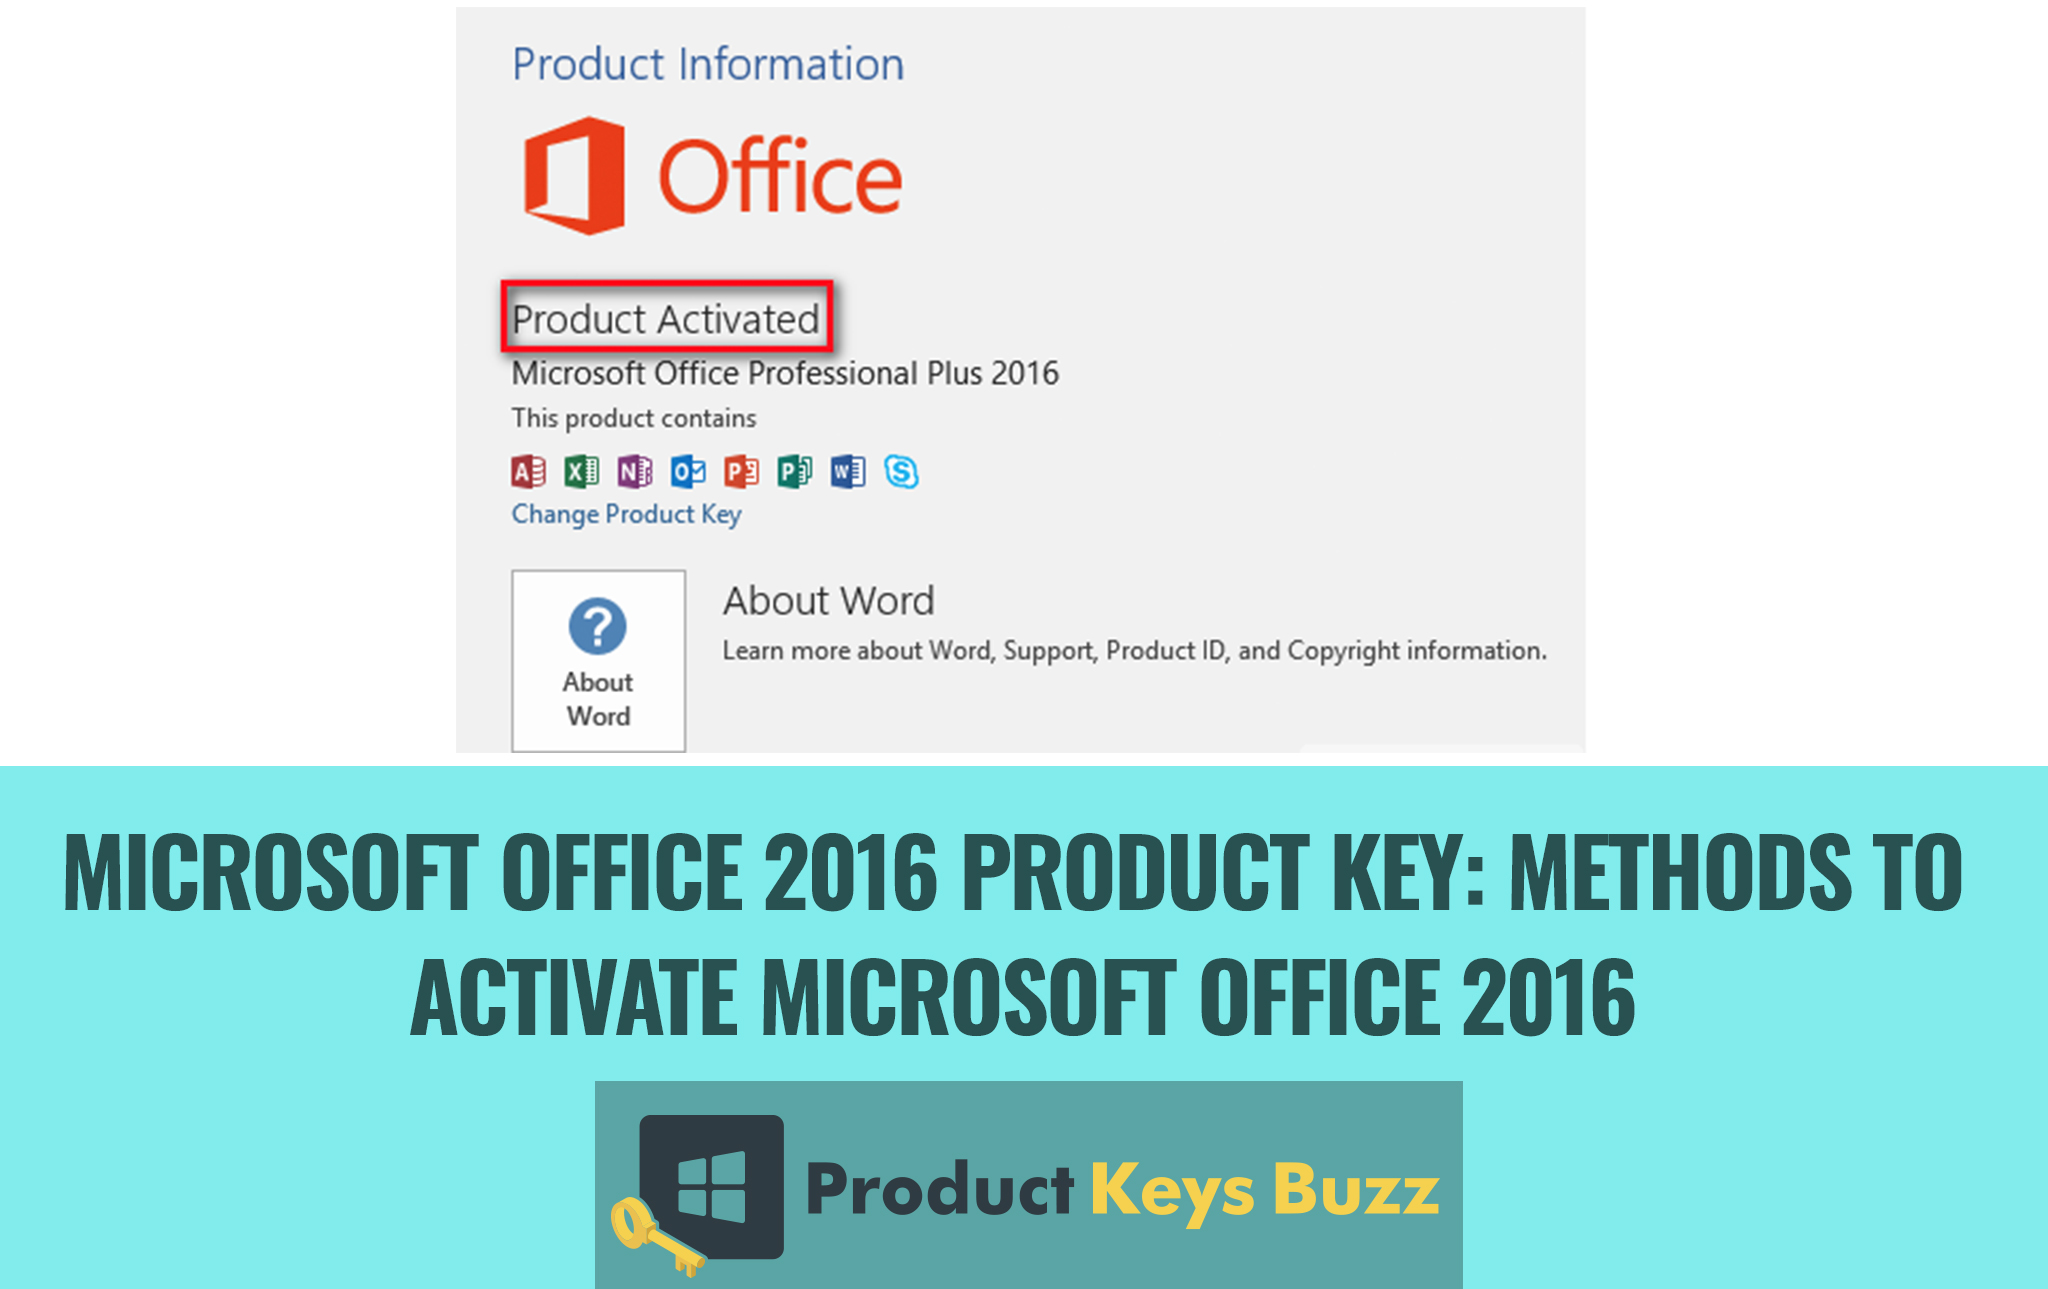 product key for microsoft office 2016 pc be used on a mac?